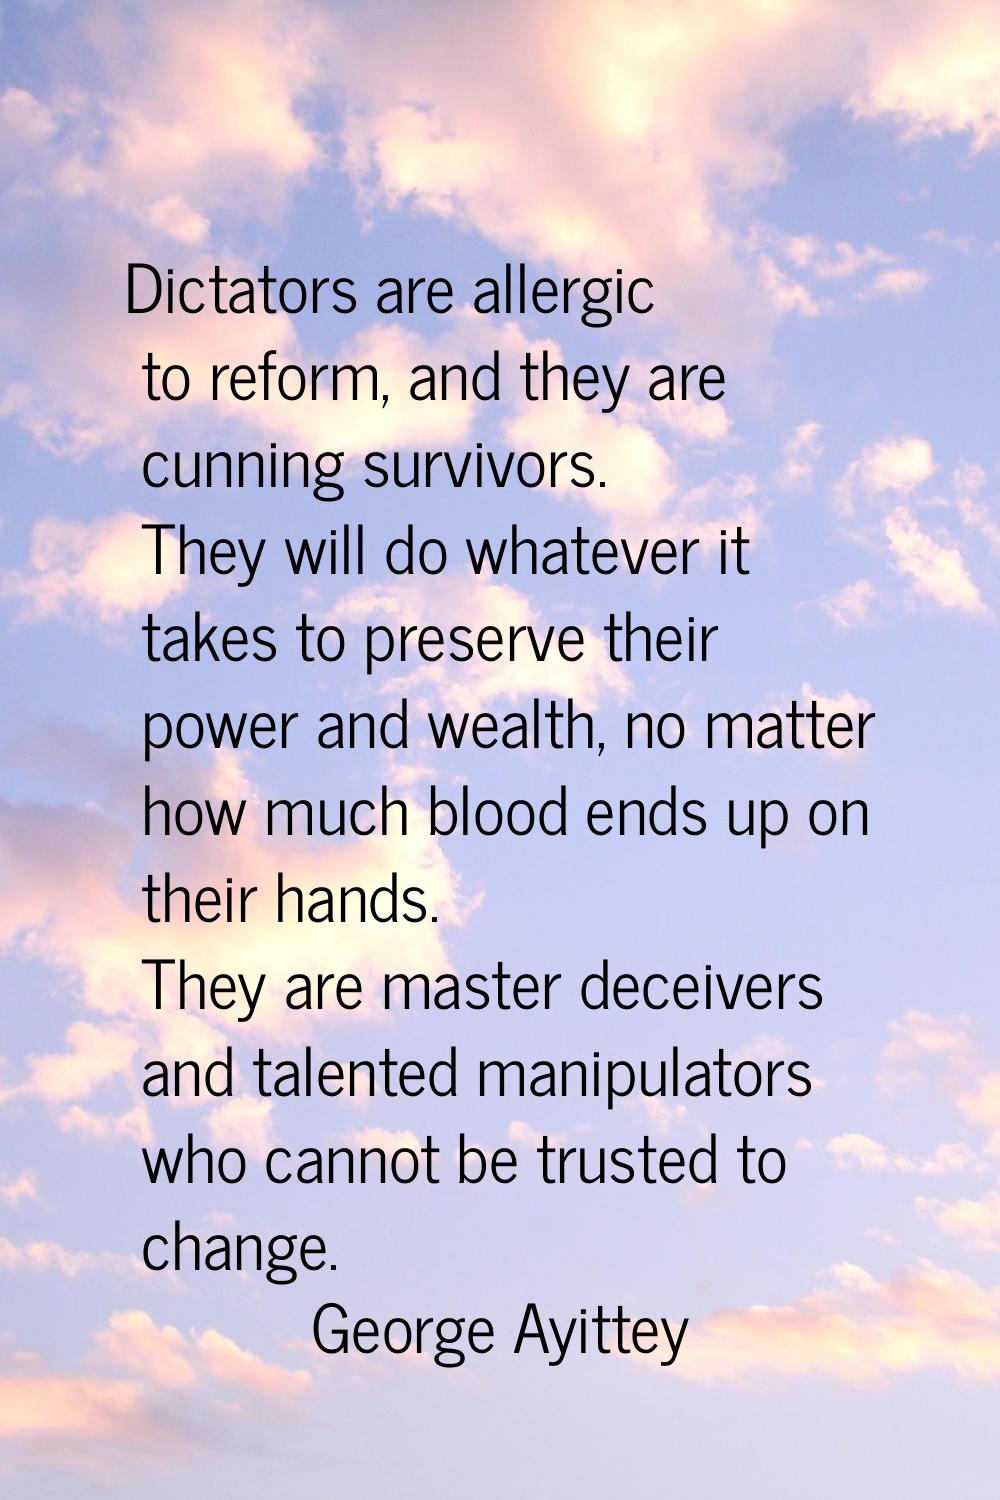 Dictators are allergic to reform, and they are cunning survivors. They will do whatever it takes to